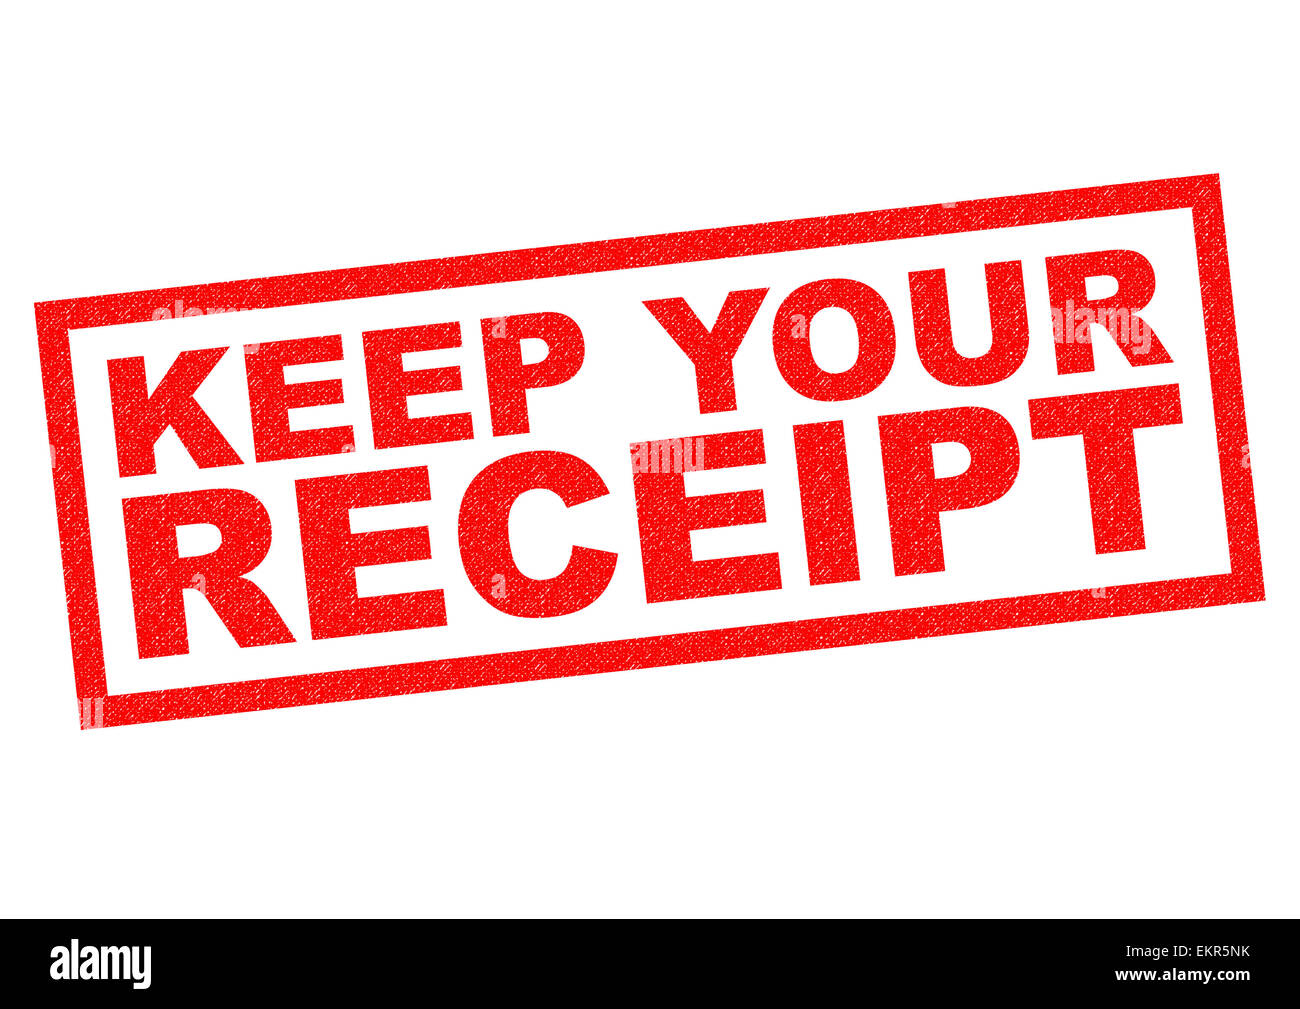 KEEP YOUR RECEIPT red Rubber Stamp over a white background. Stock Photo